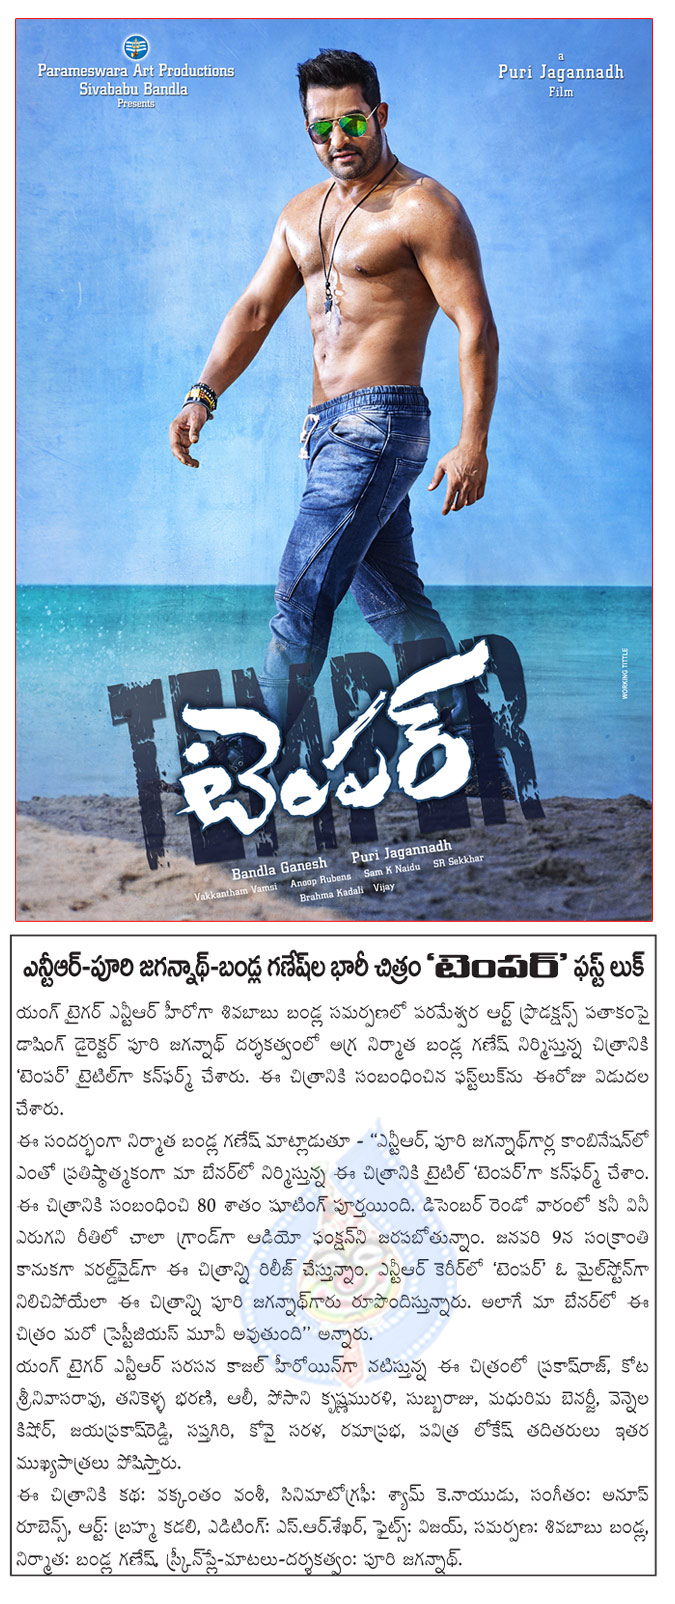 ntr latest movie temper,telugu movie temper,ntr and puri jagannath combo movie temper first look,temper music director anup rubens,temper movie audio function in december 2nd week,temper movie will release on 9th january  ntr latest movie temper, telugu movie temper, ntr and puri jagannath combo movie temper first look, temper music director anup rubens, temper movie audio function in december 2nd week, temper movie will release on 9th january